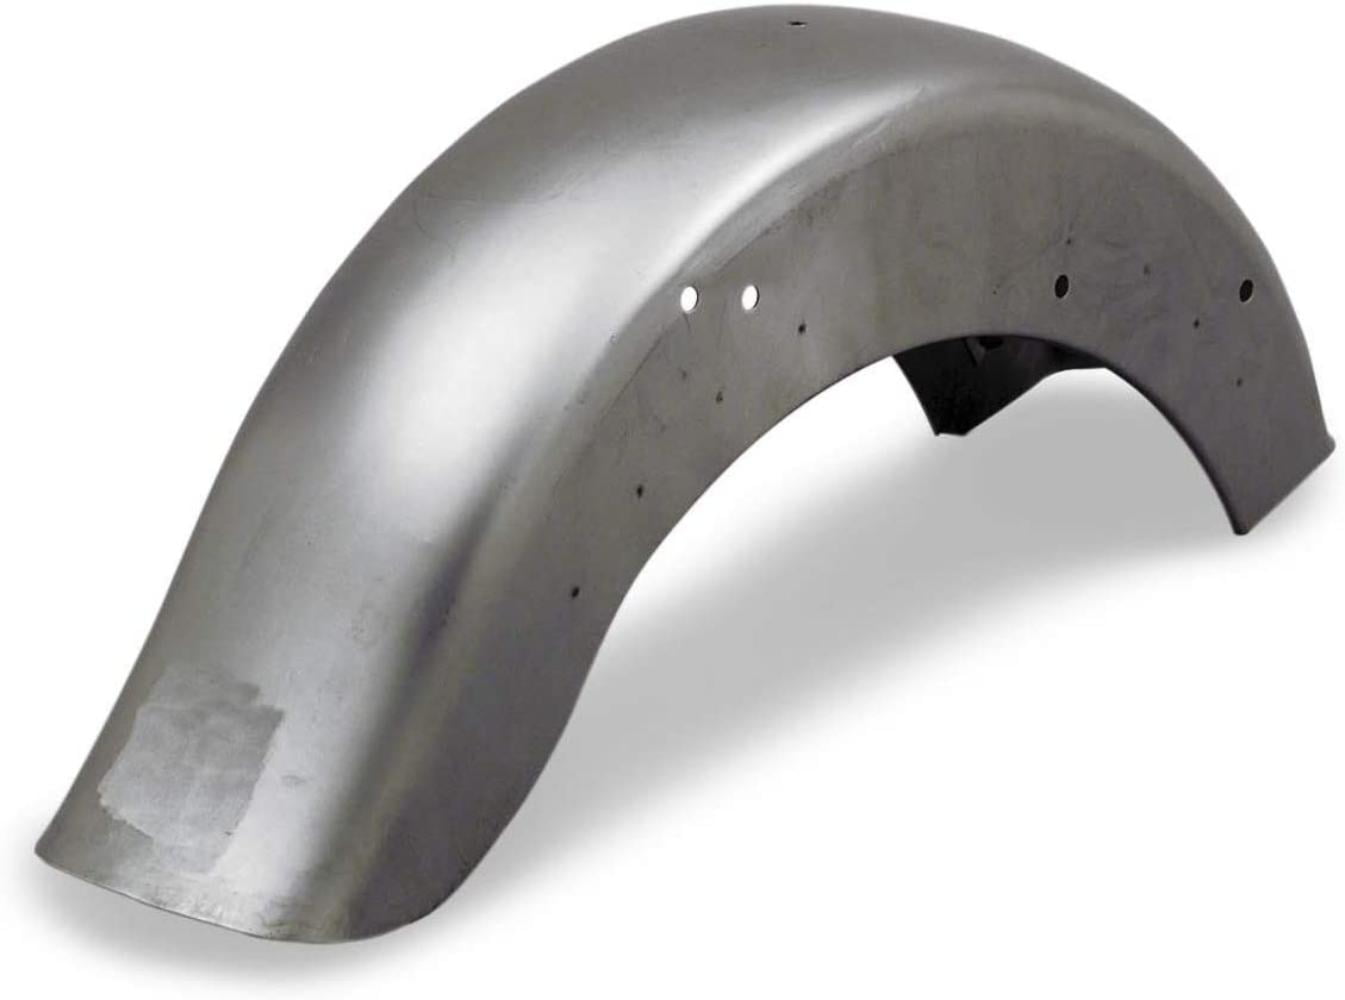 BIKERS CHOICE SOFTAIL REAR FENDER HD FXST FXSTS 84-96 